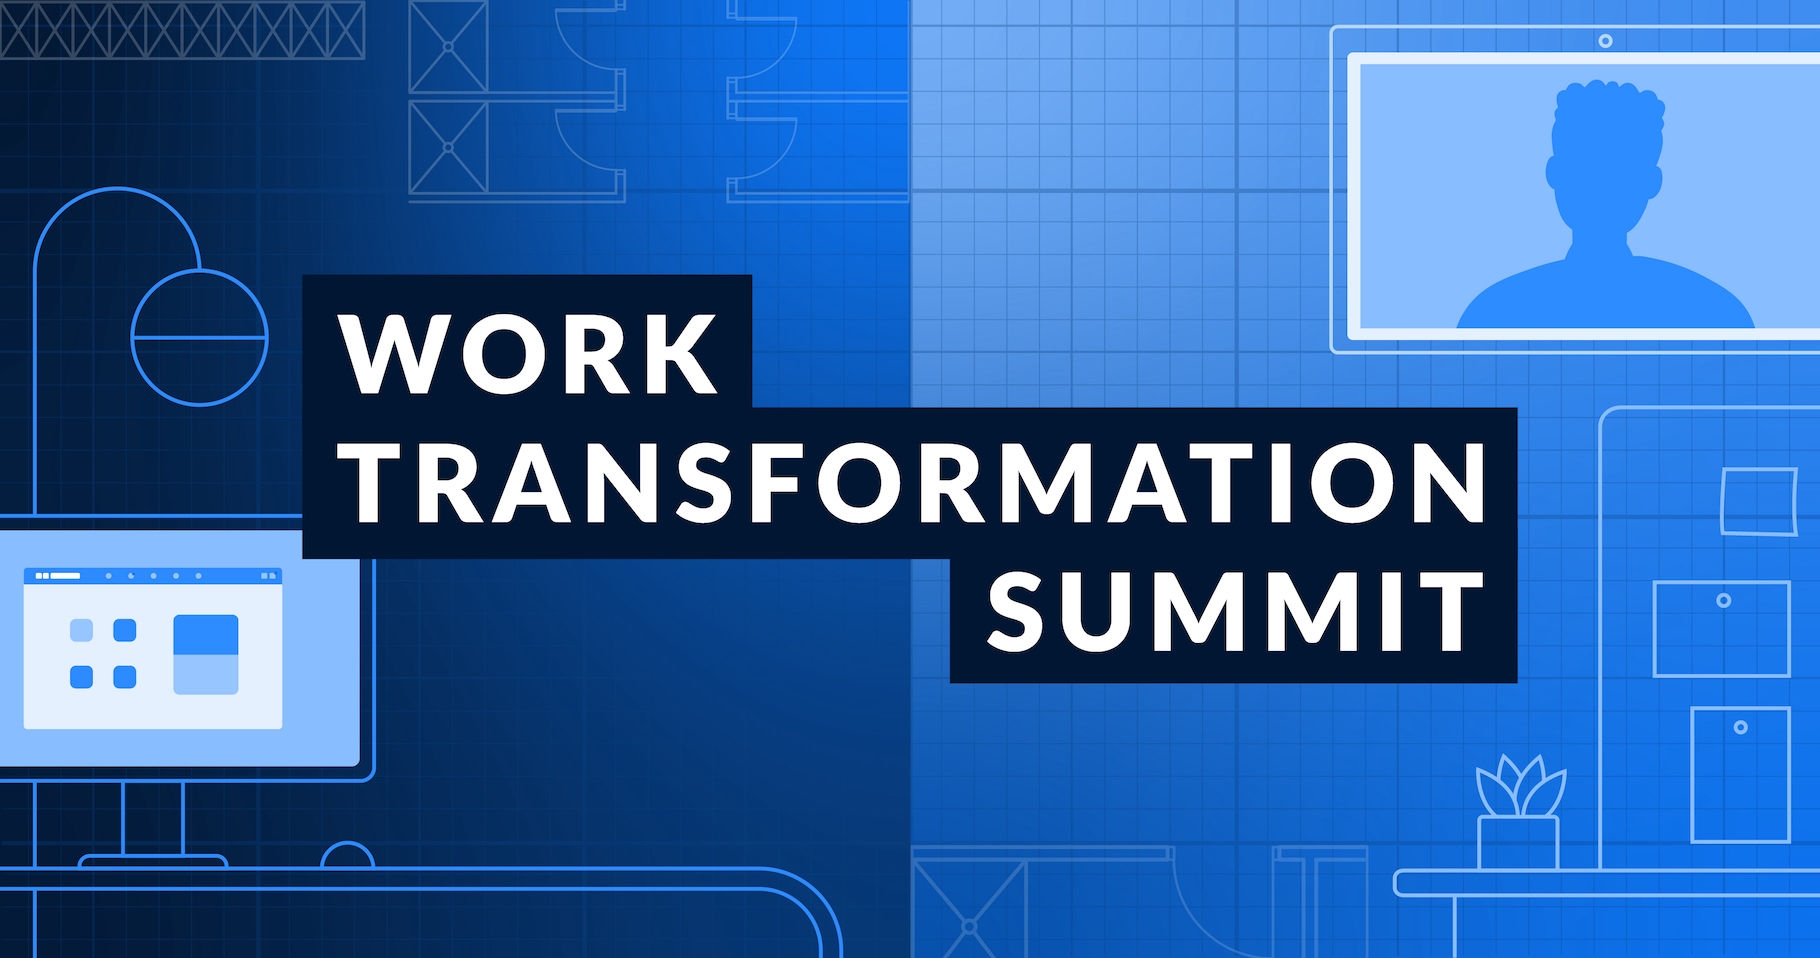 Zoom’S Work Transformation Summit On Jan. 19: Fresh Approaches For Moving Forward